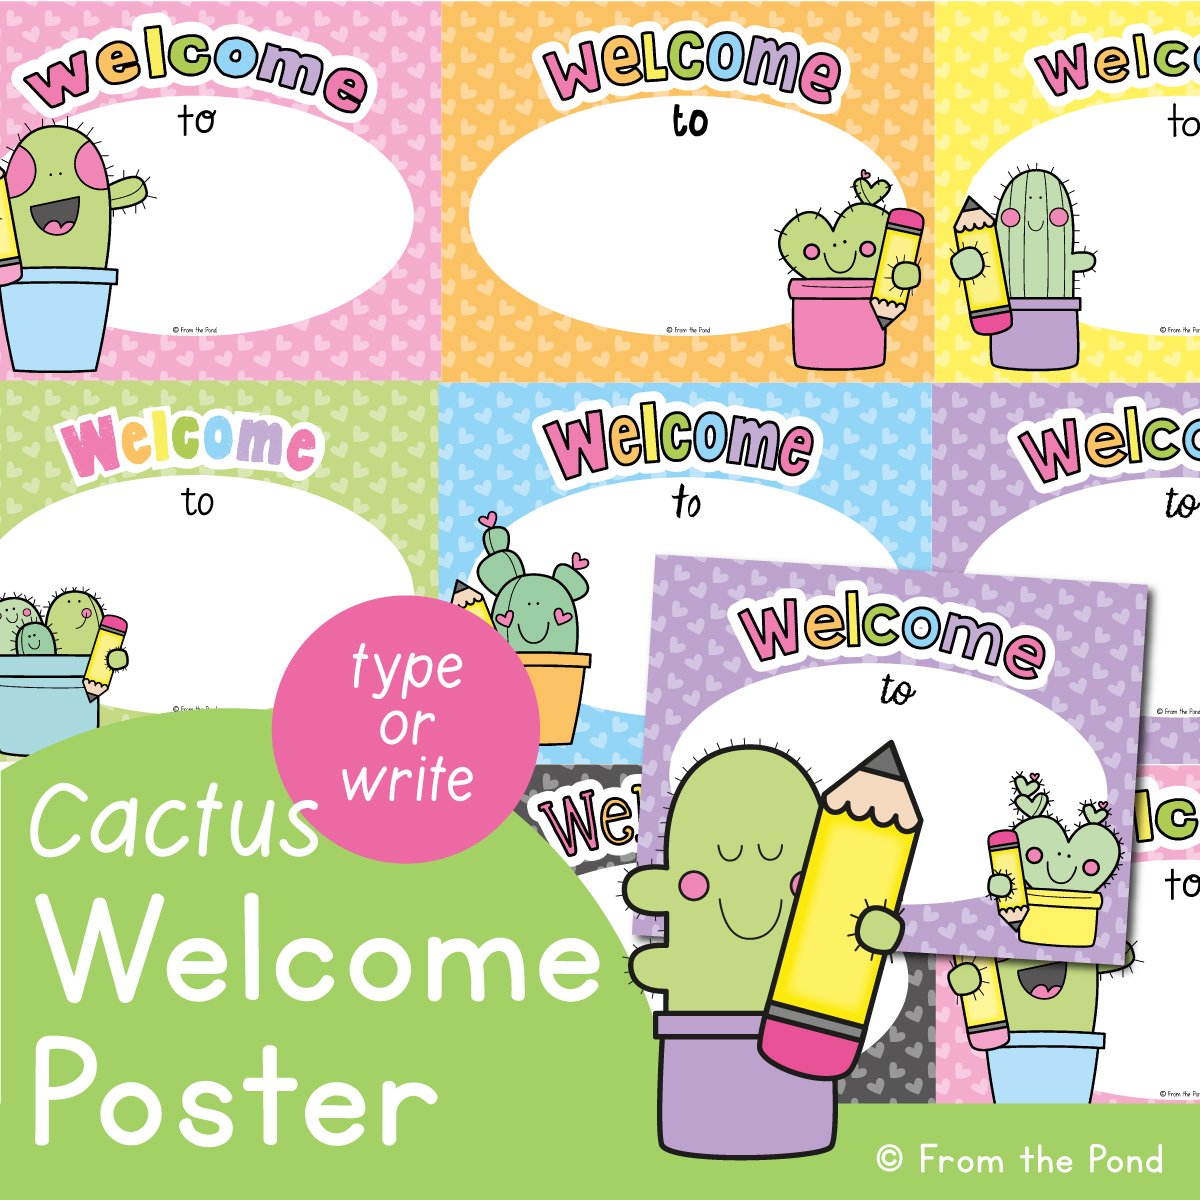 Cactus Welcome